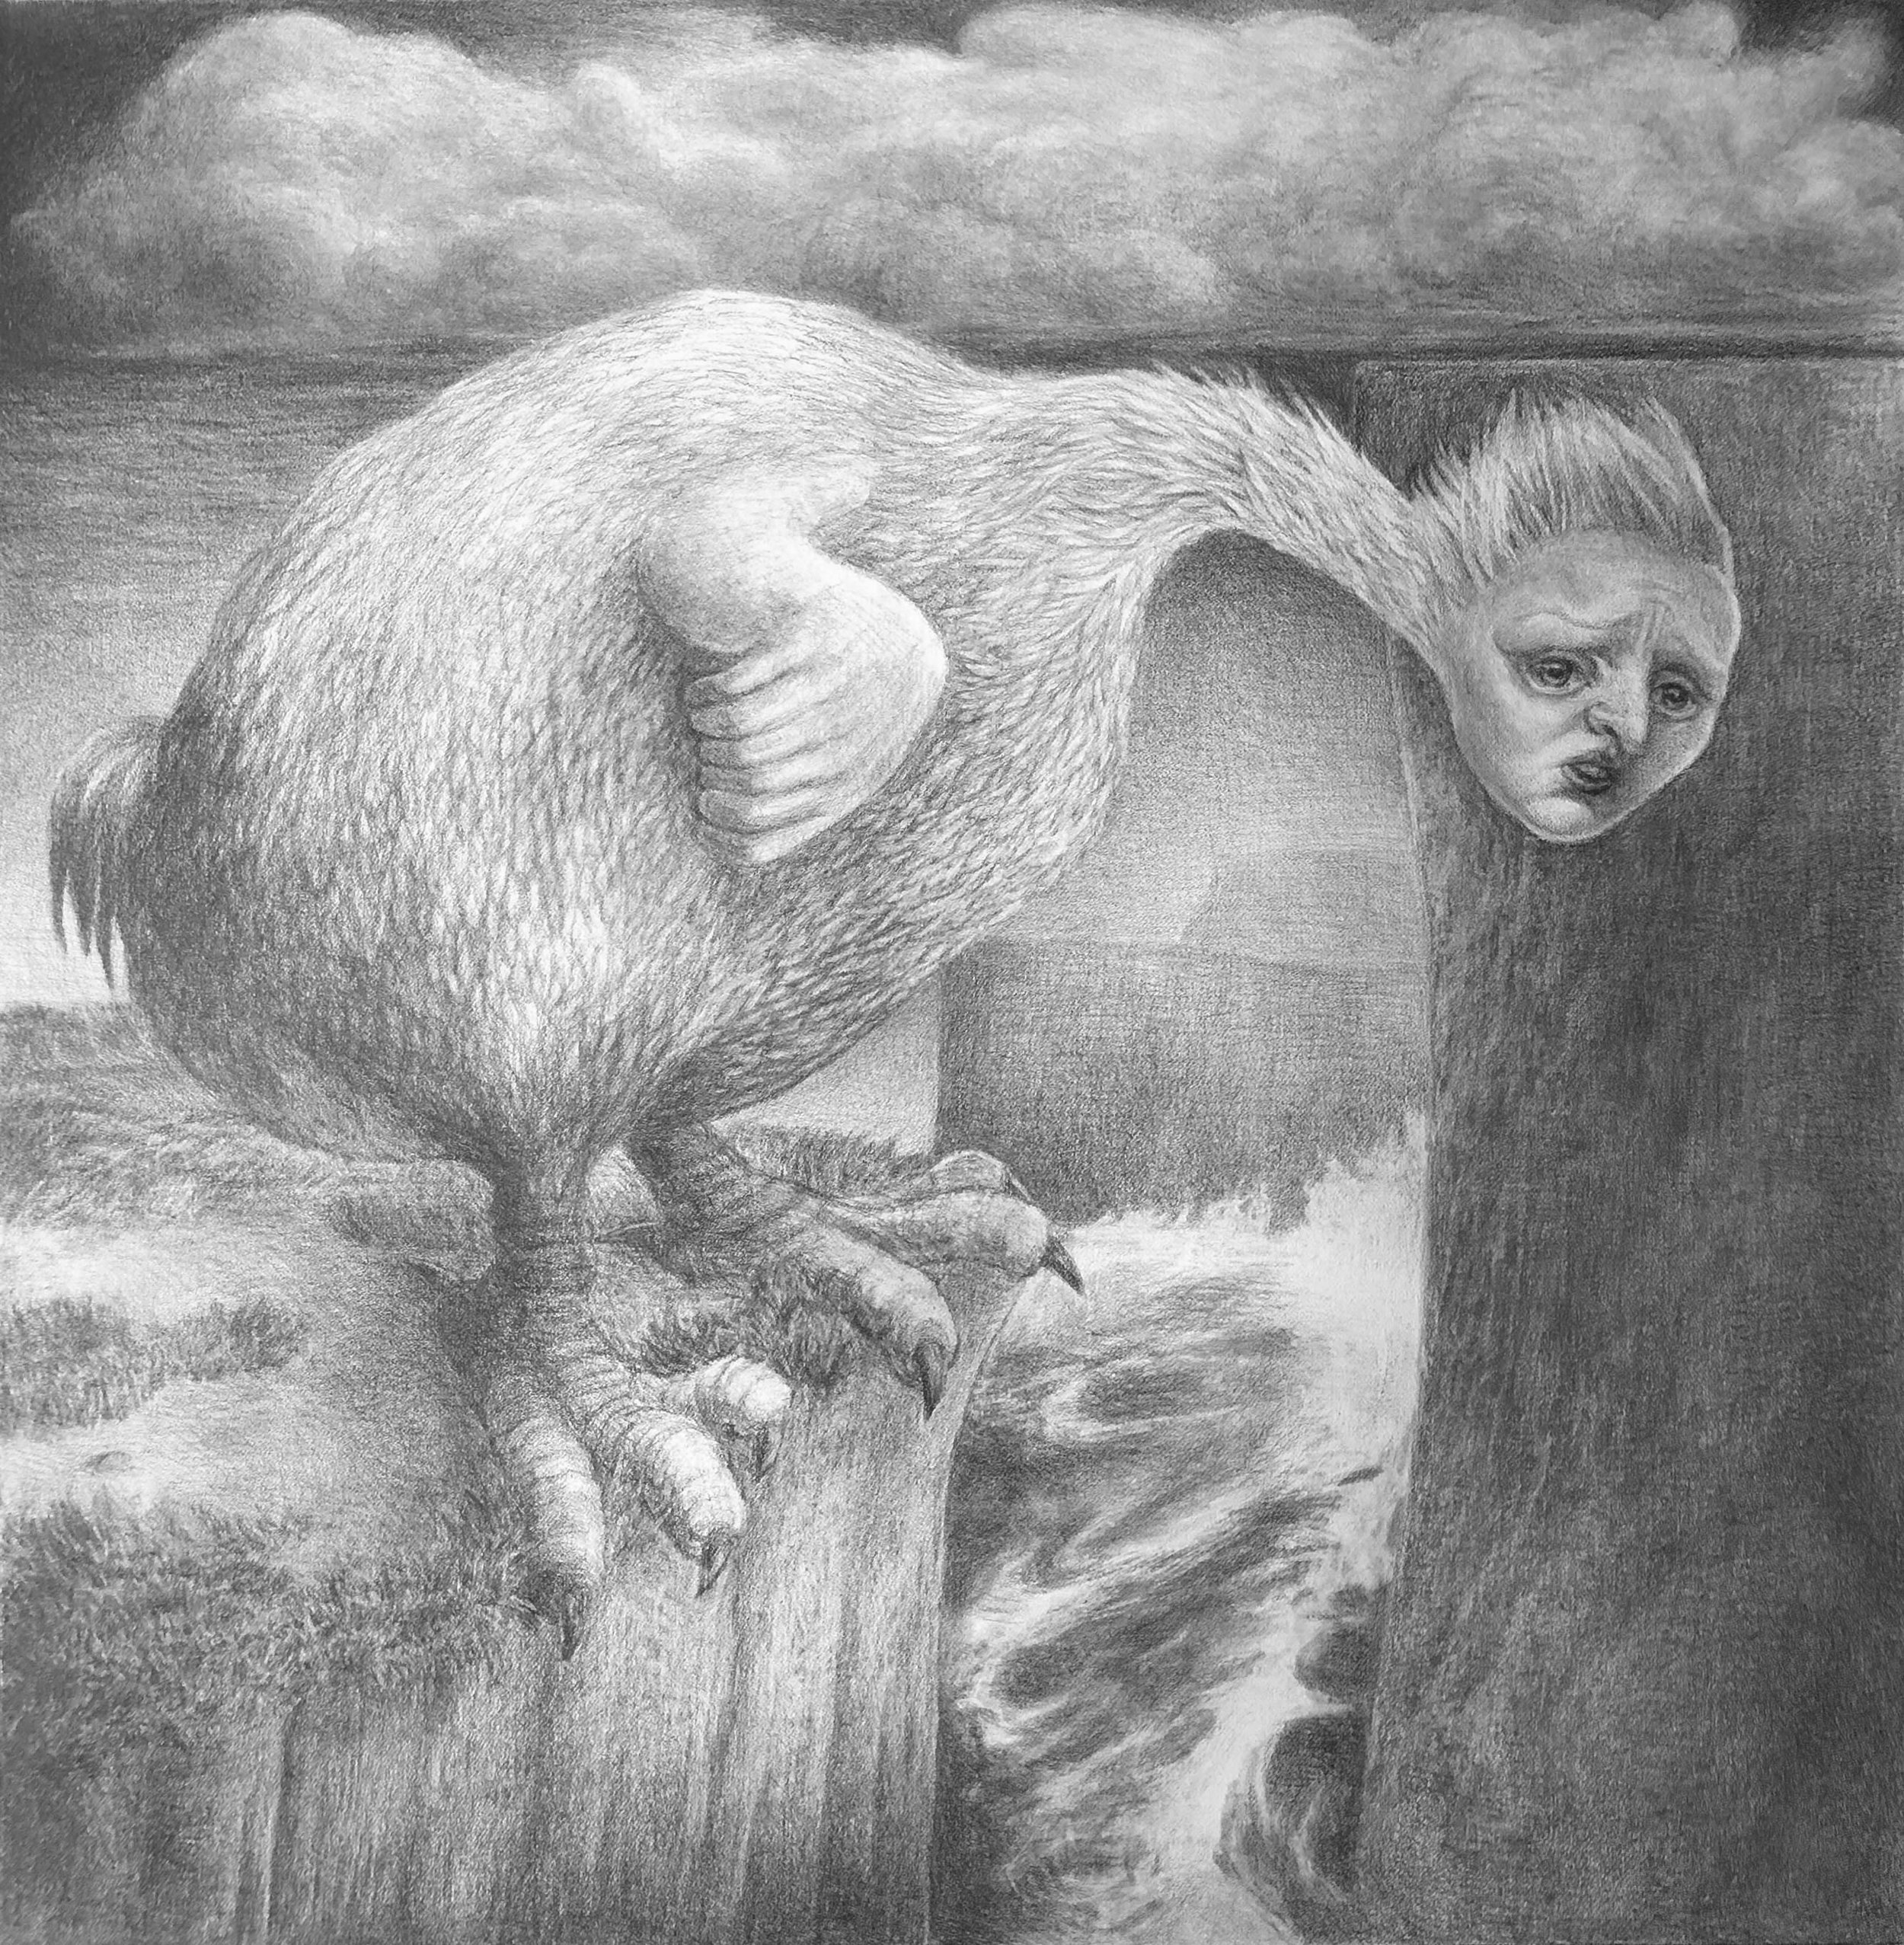 "What Killed The Dodo?" 2022 Pencil on Arches 140 lb Watercolor Paper 44" x 43.5"